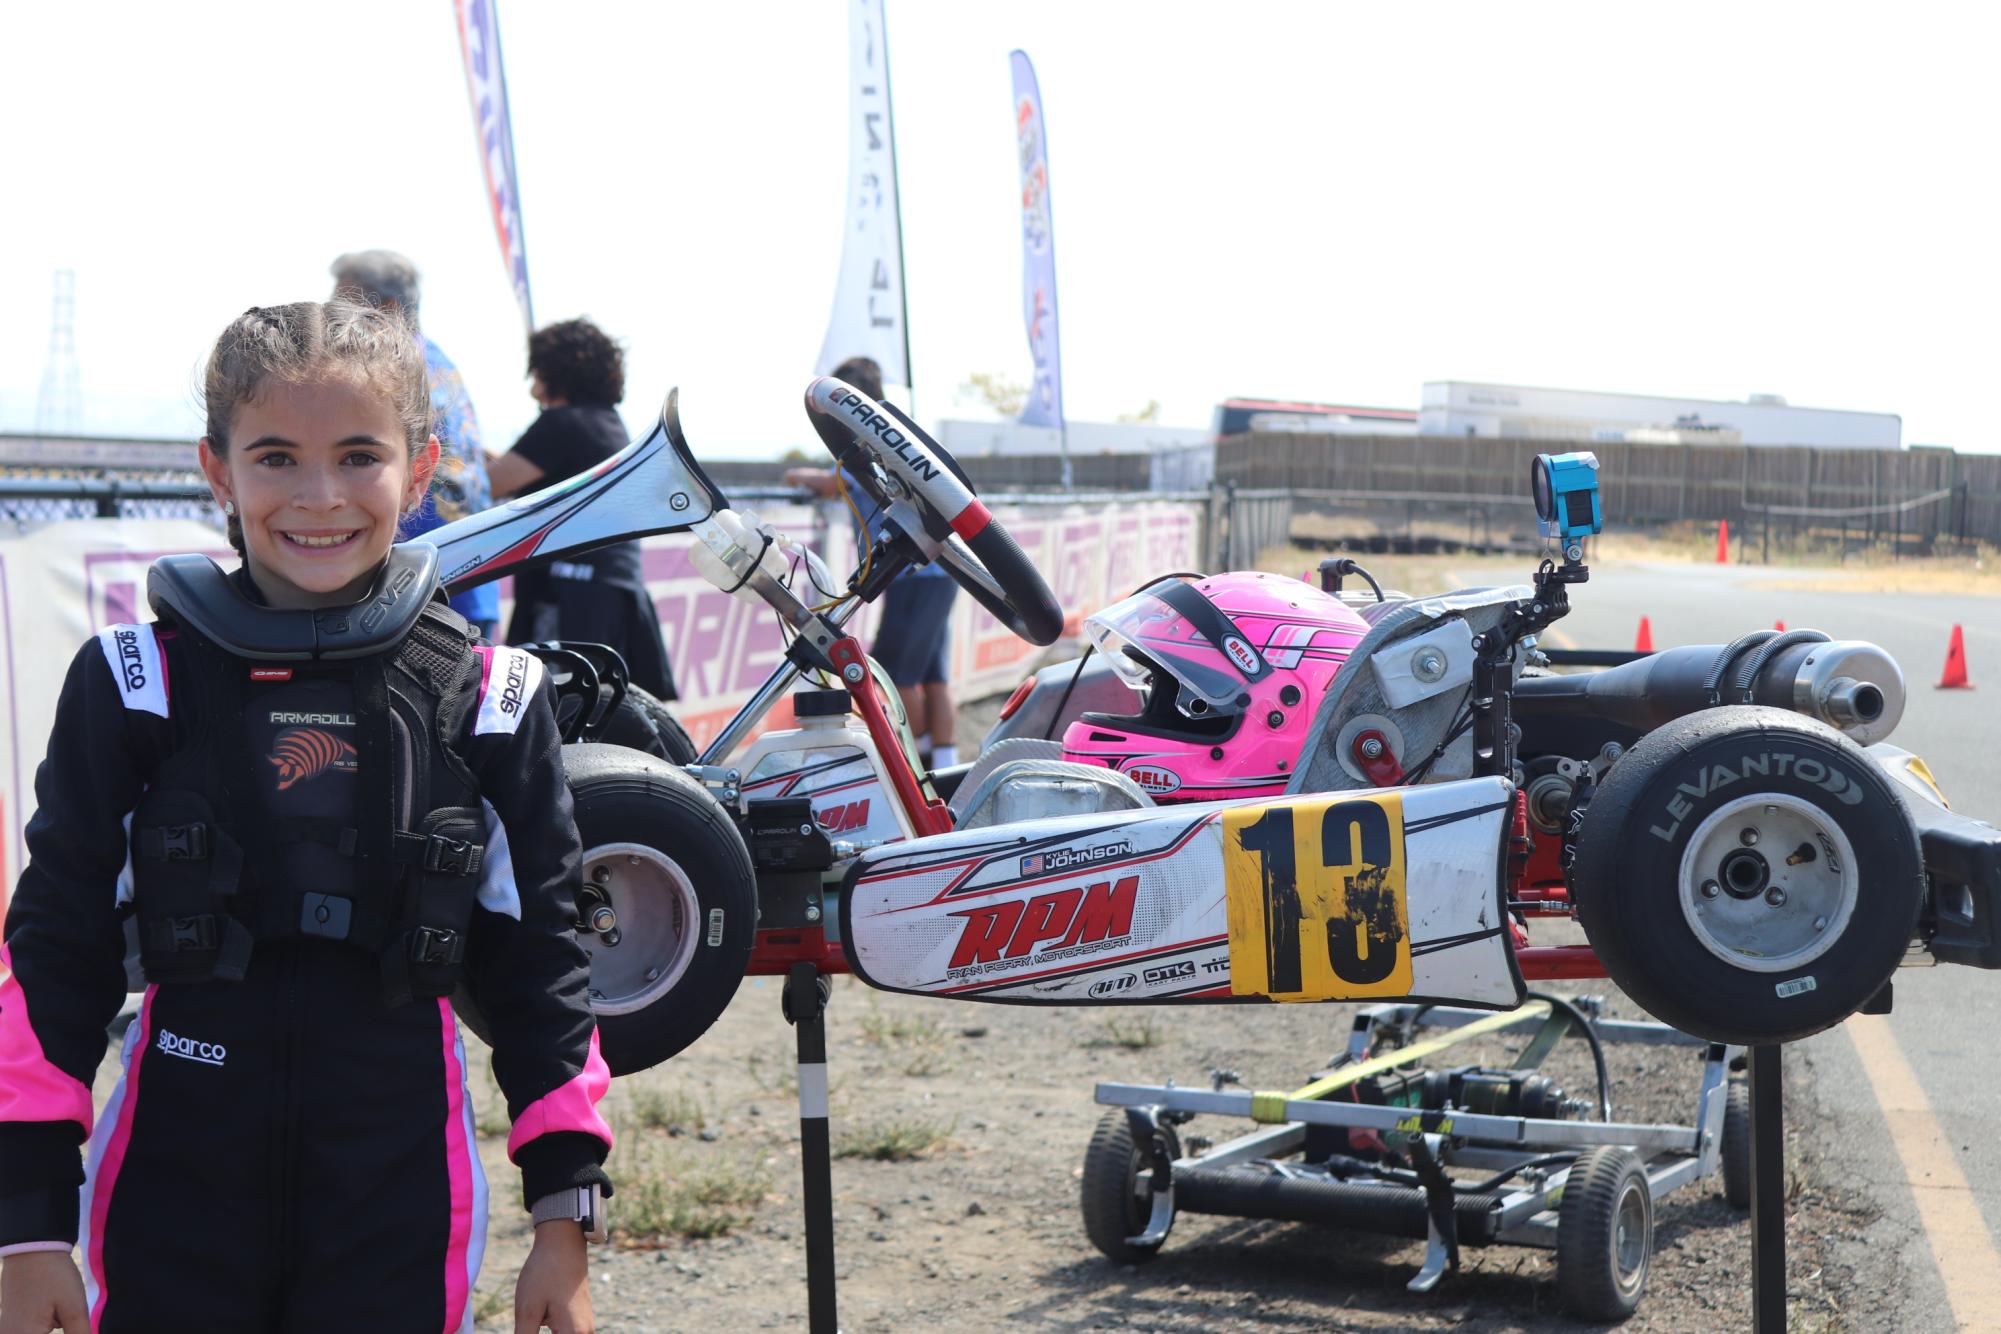 Kylie Johnson with her kart, complete with a neon pink helmet. She loves the speed of karting (and beating out the boys she competes with too). “I want to get to F1 and be the first girl,” Kylie said. (Elaine Jiang)